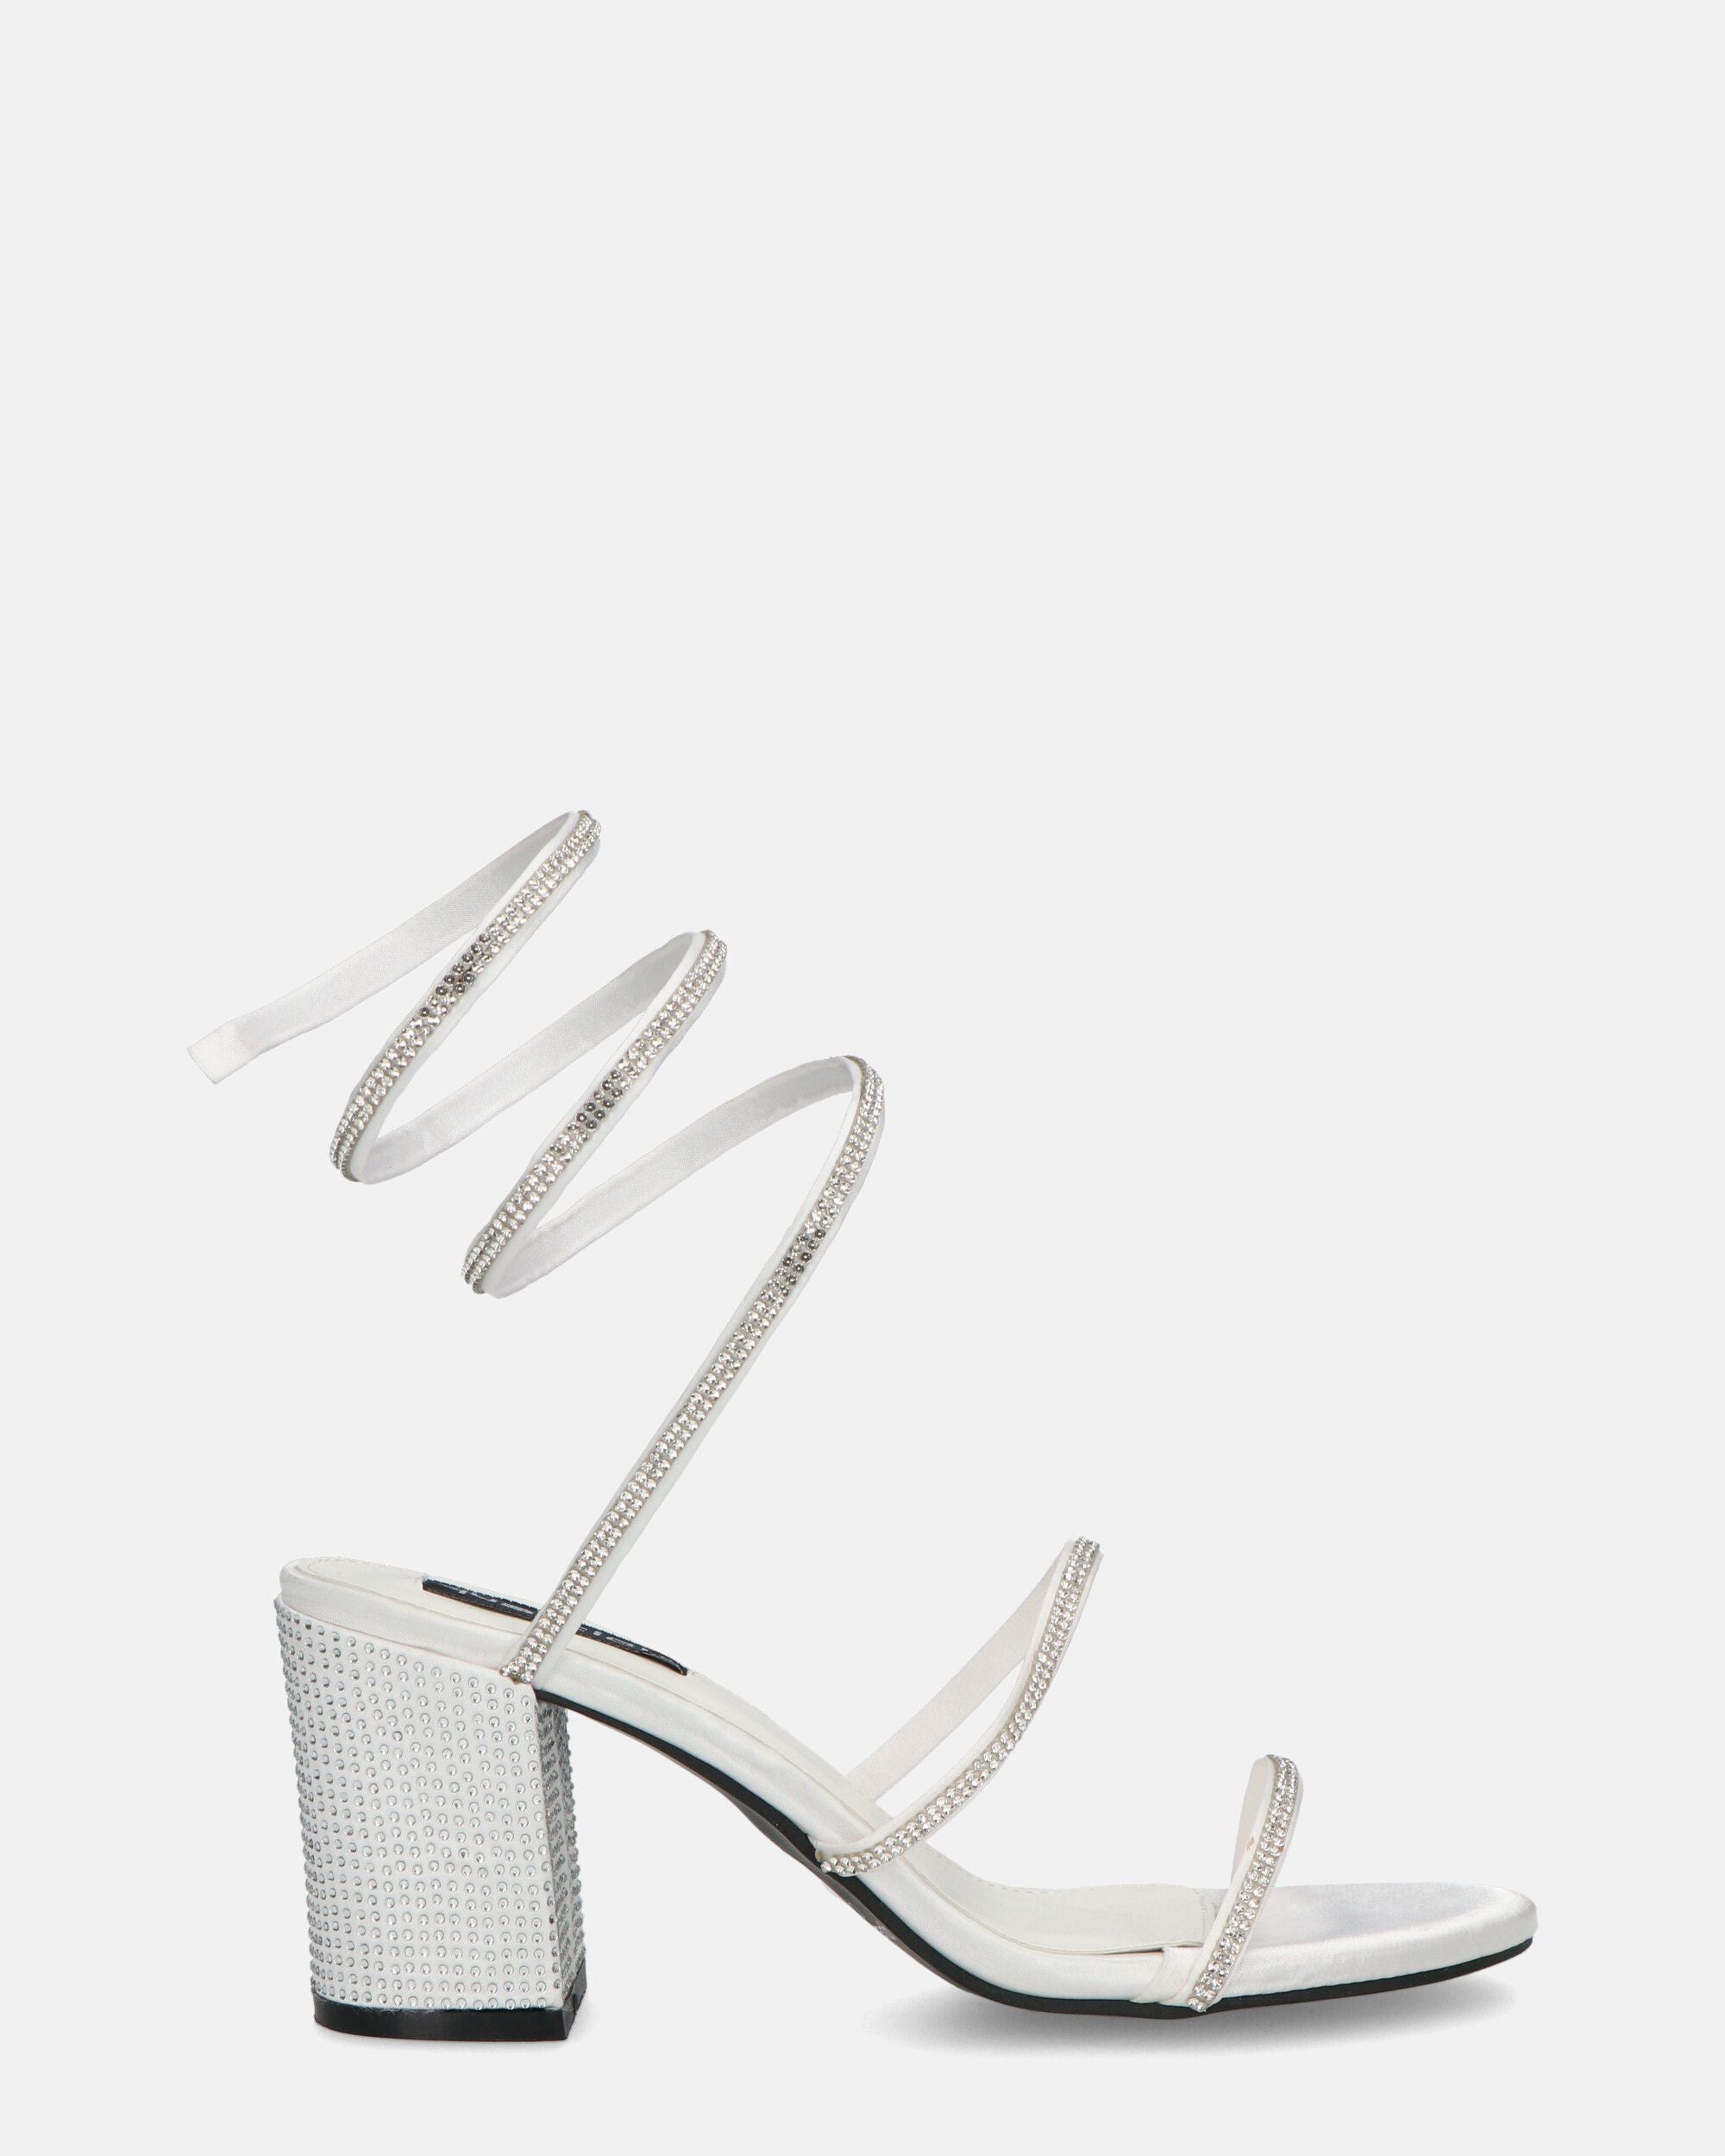 COBY - silver high heels with gems and spiral